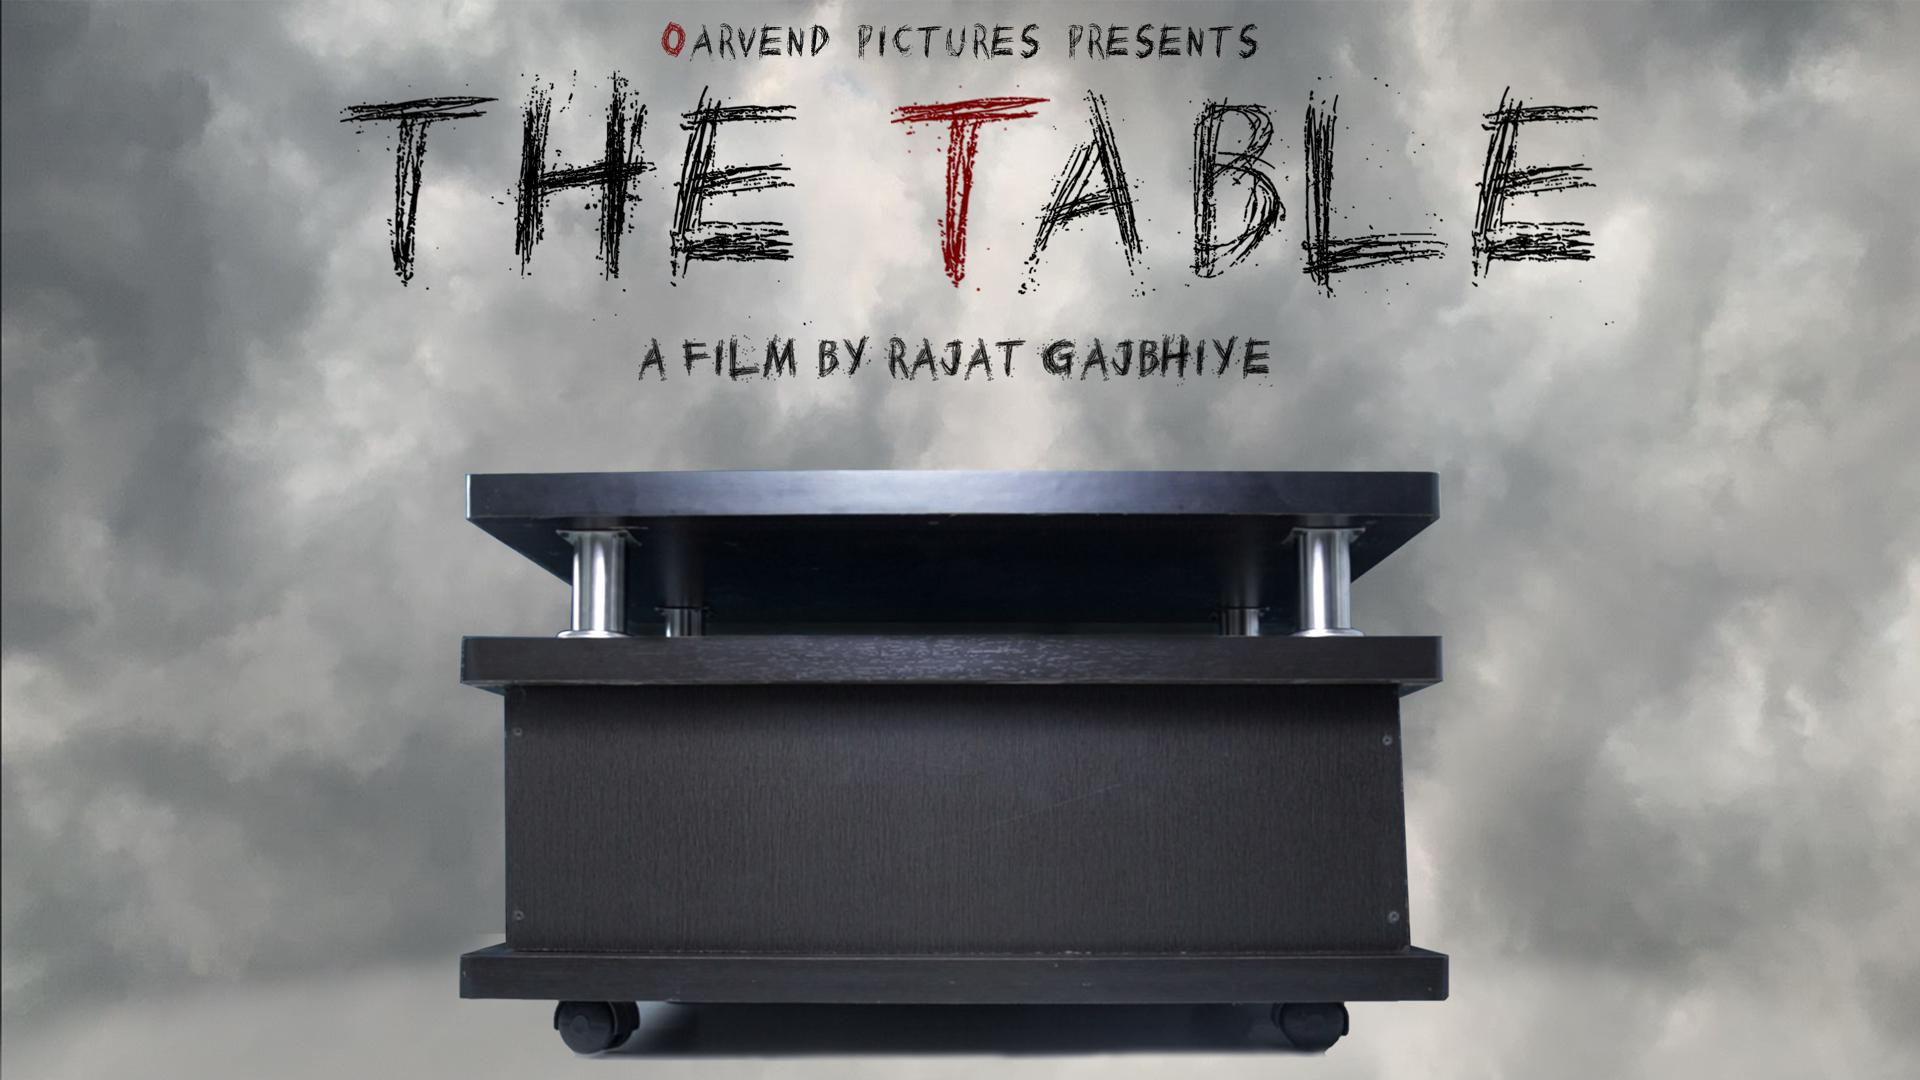 The Table